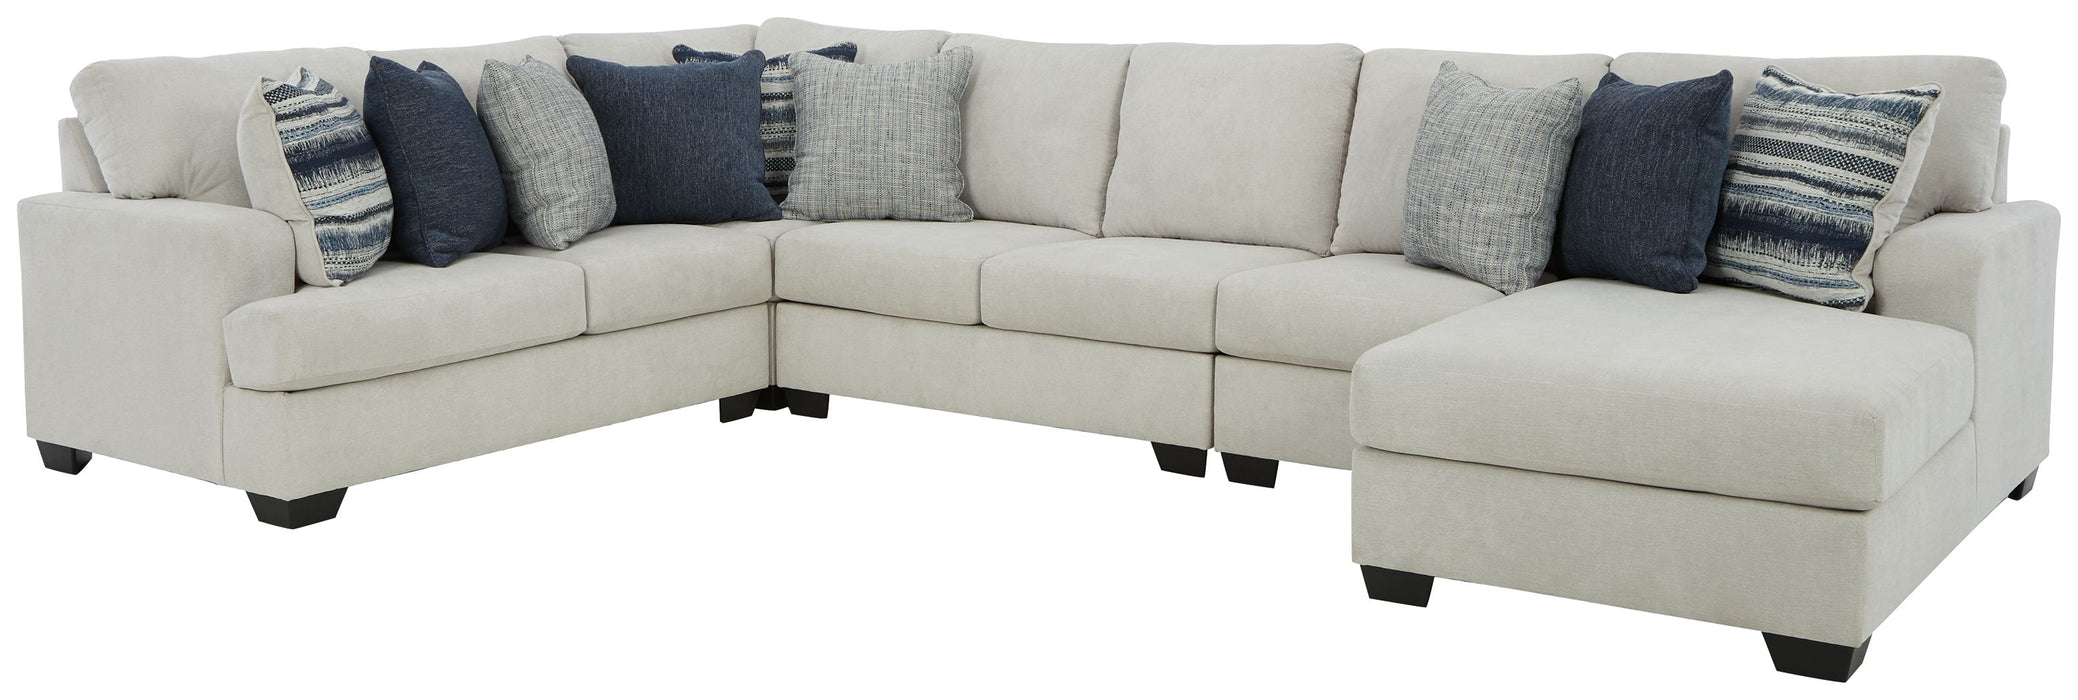 Lowder - Sectional Capital Discount Furniture Home Furniture, Home Decor, Furniture